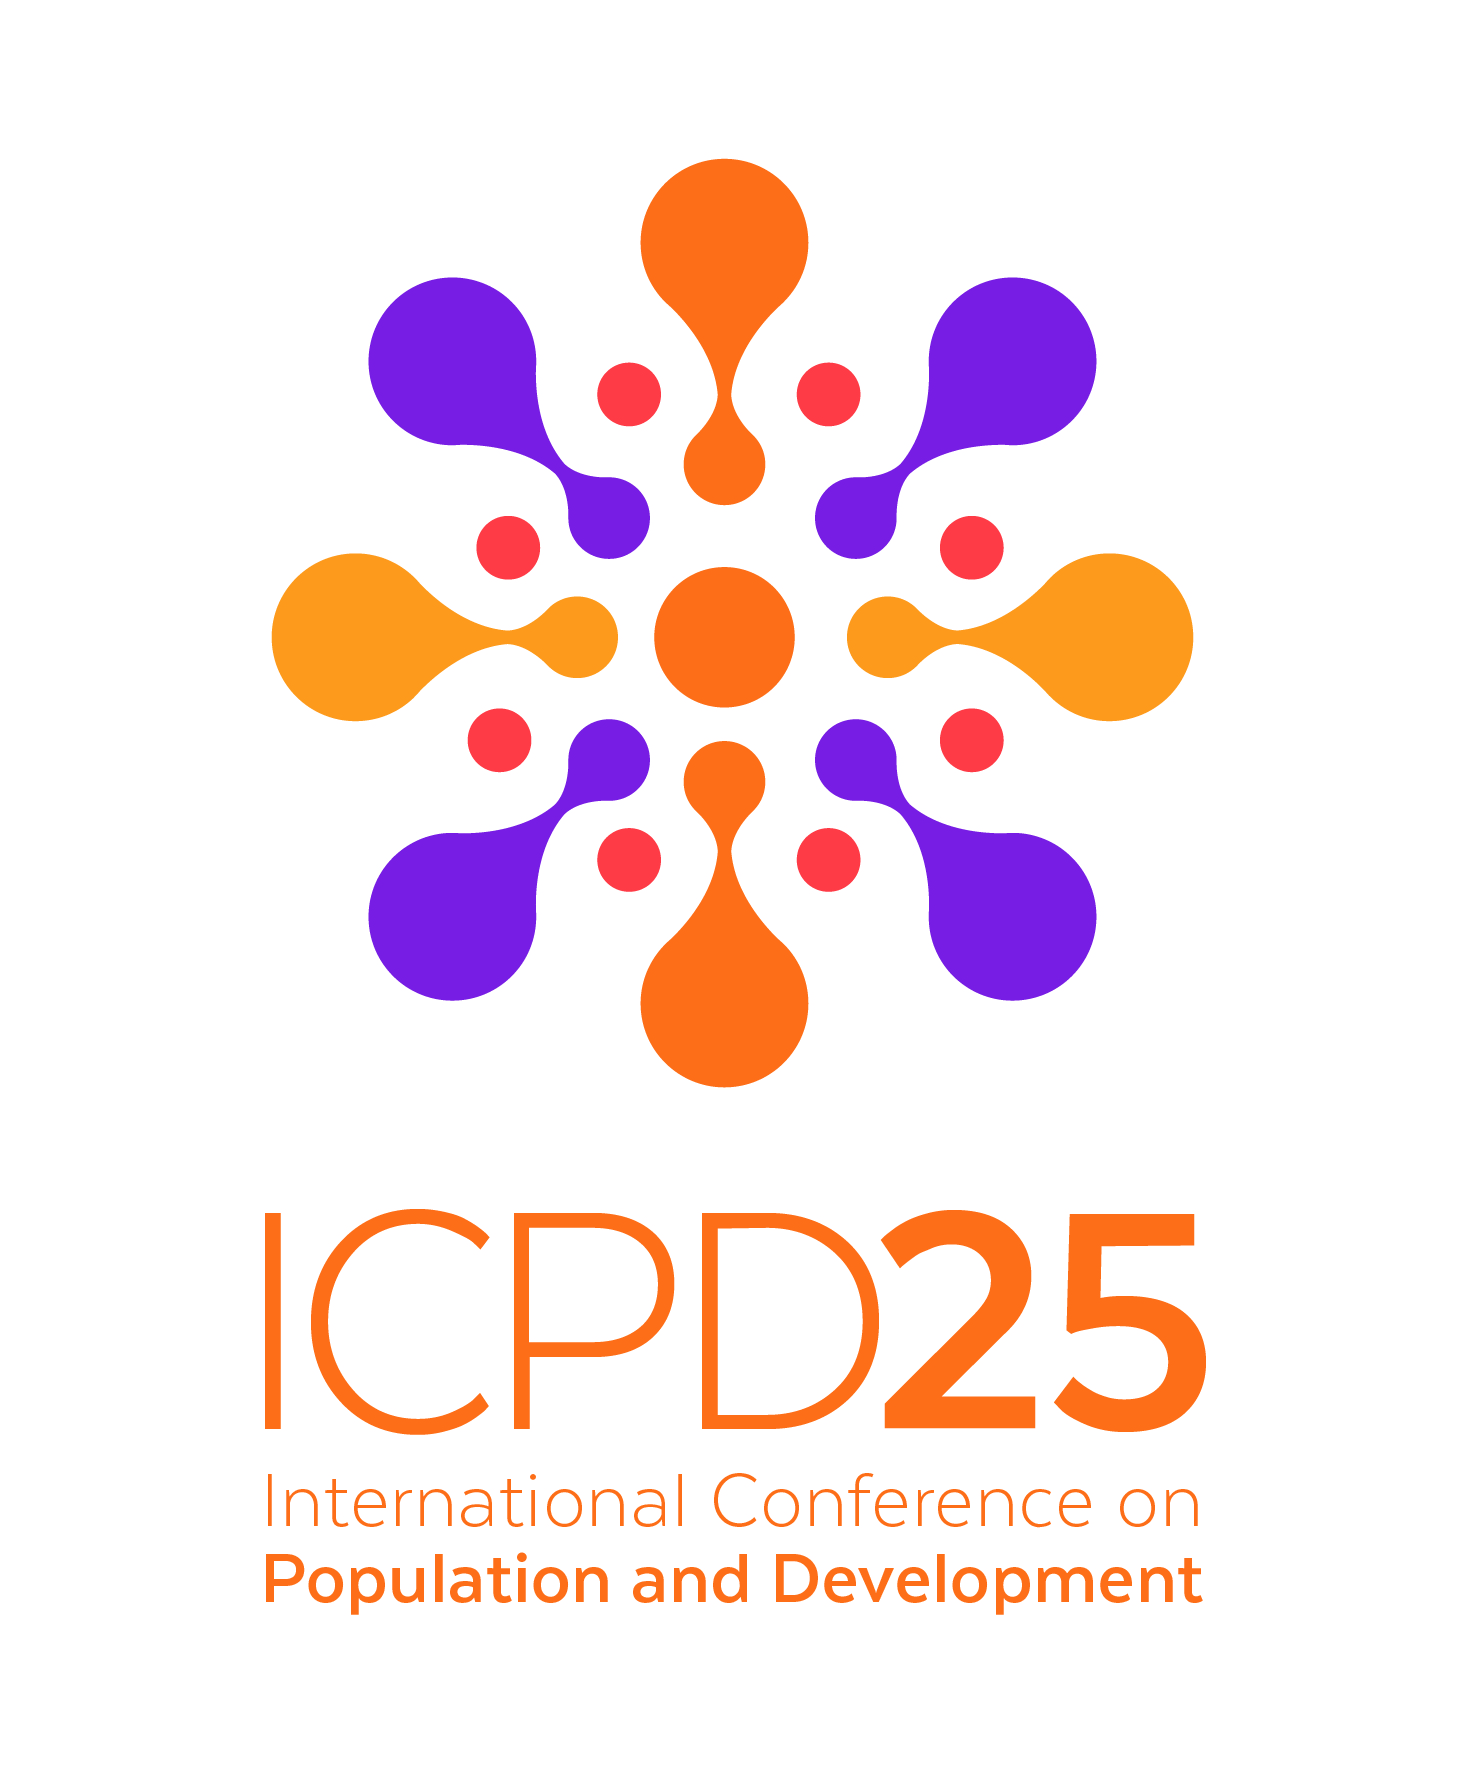 25. ICPD 25. Icpd25 International Conference on population and Development logo. International Conference logo. UNFPA logo.